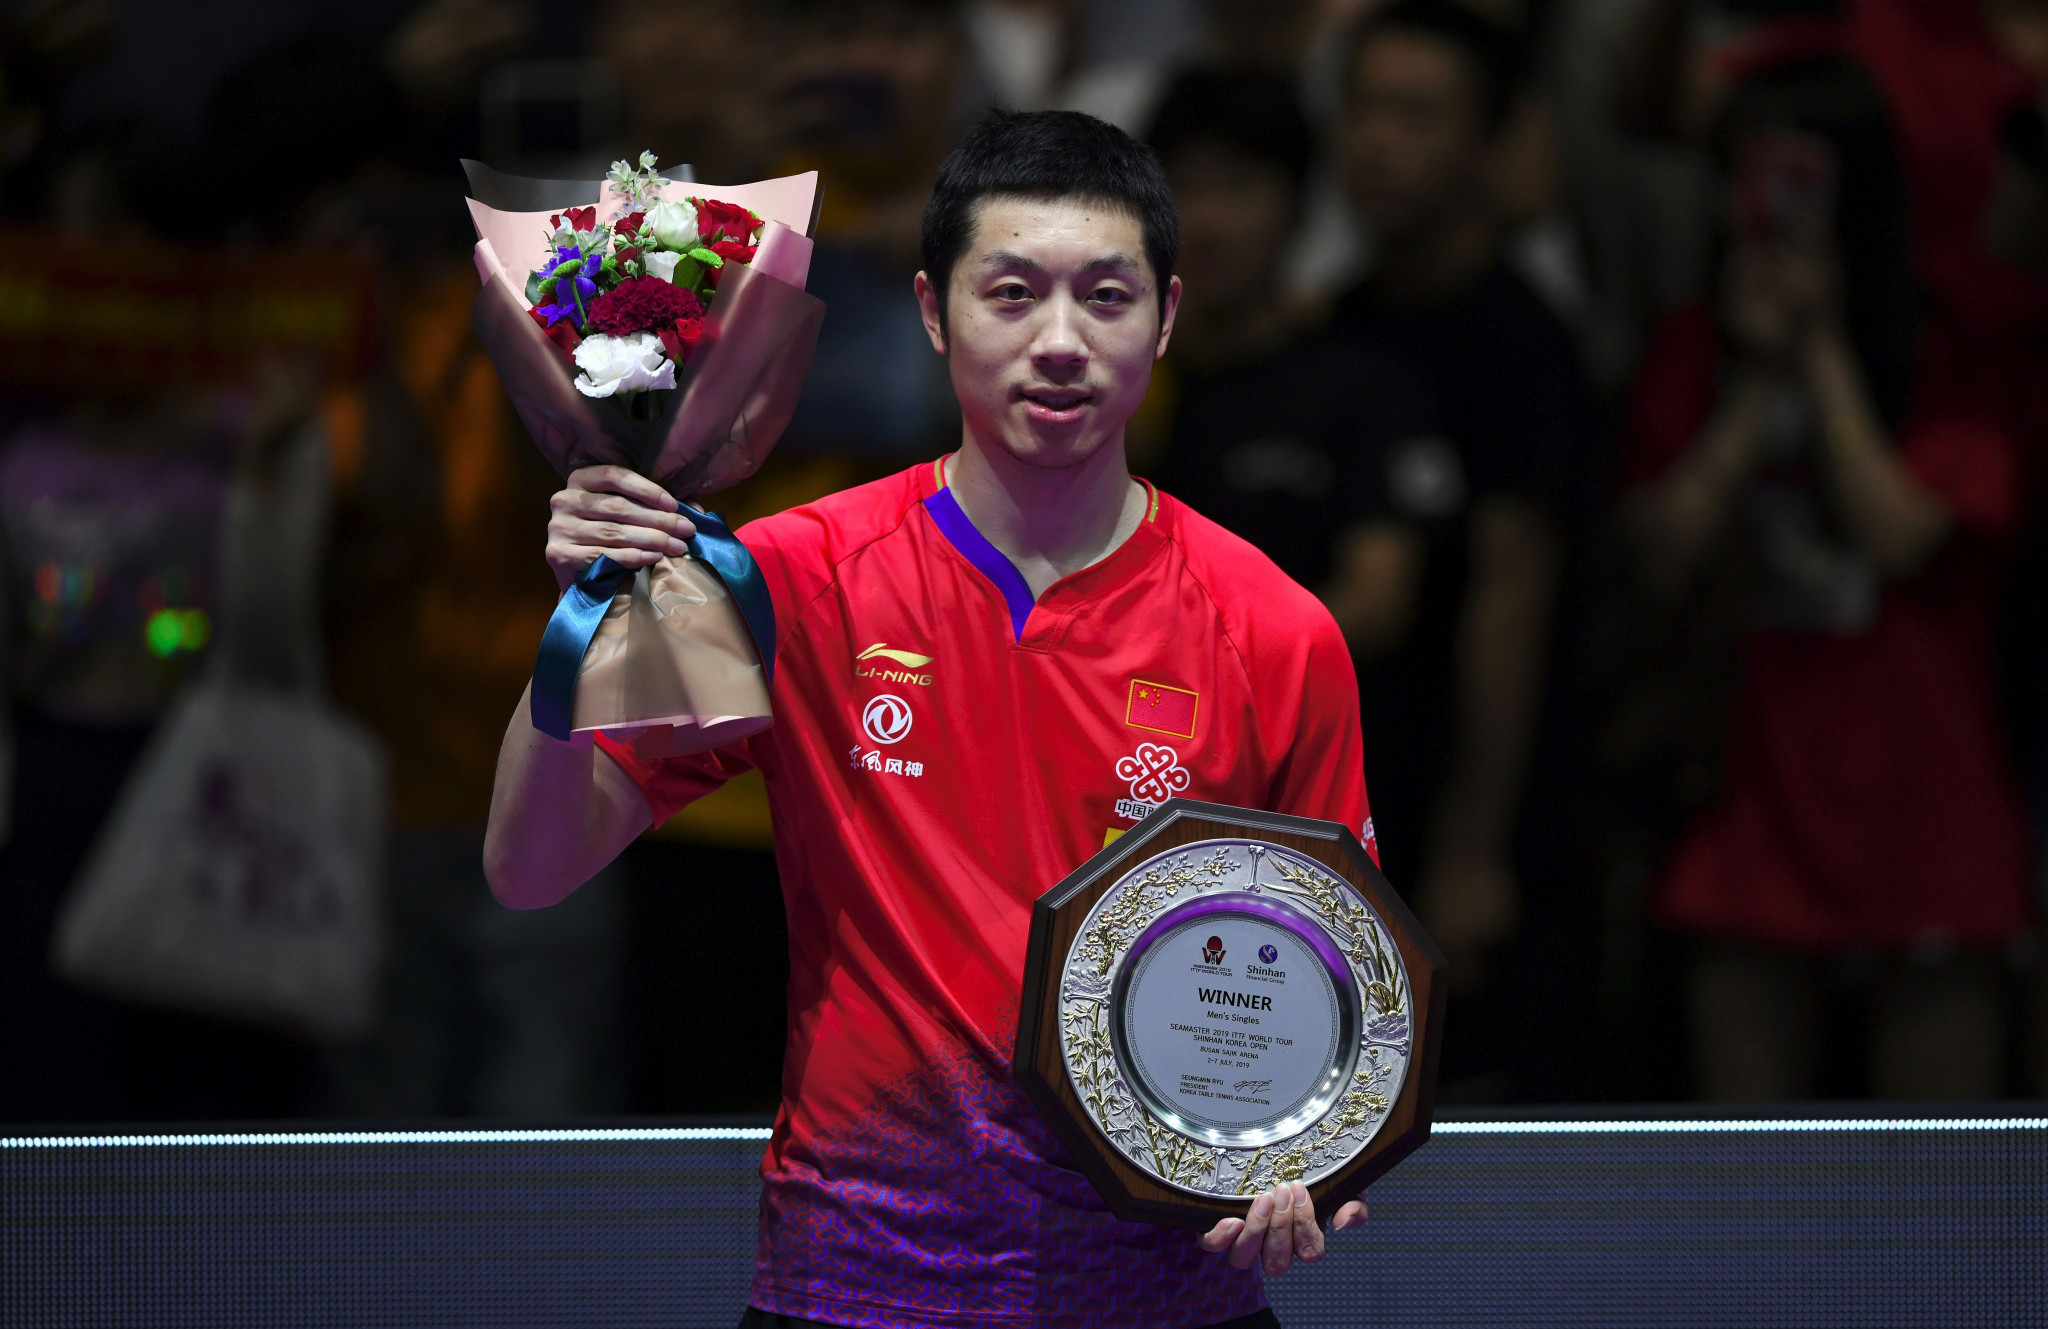 China's Xu Xin won the men's singles title for the fourth time at the International Table Tennis Federation Korean Open ©Getty Images